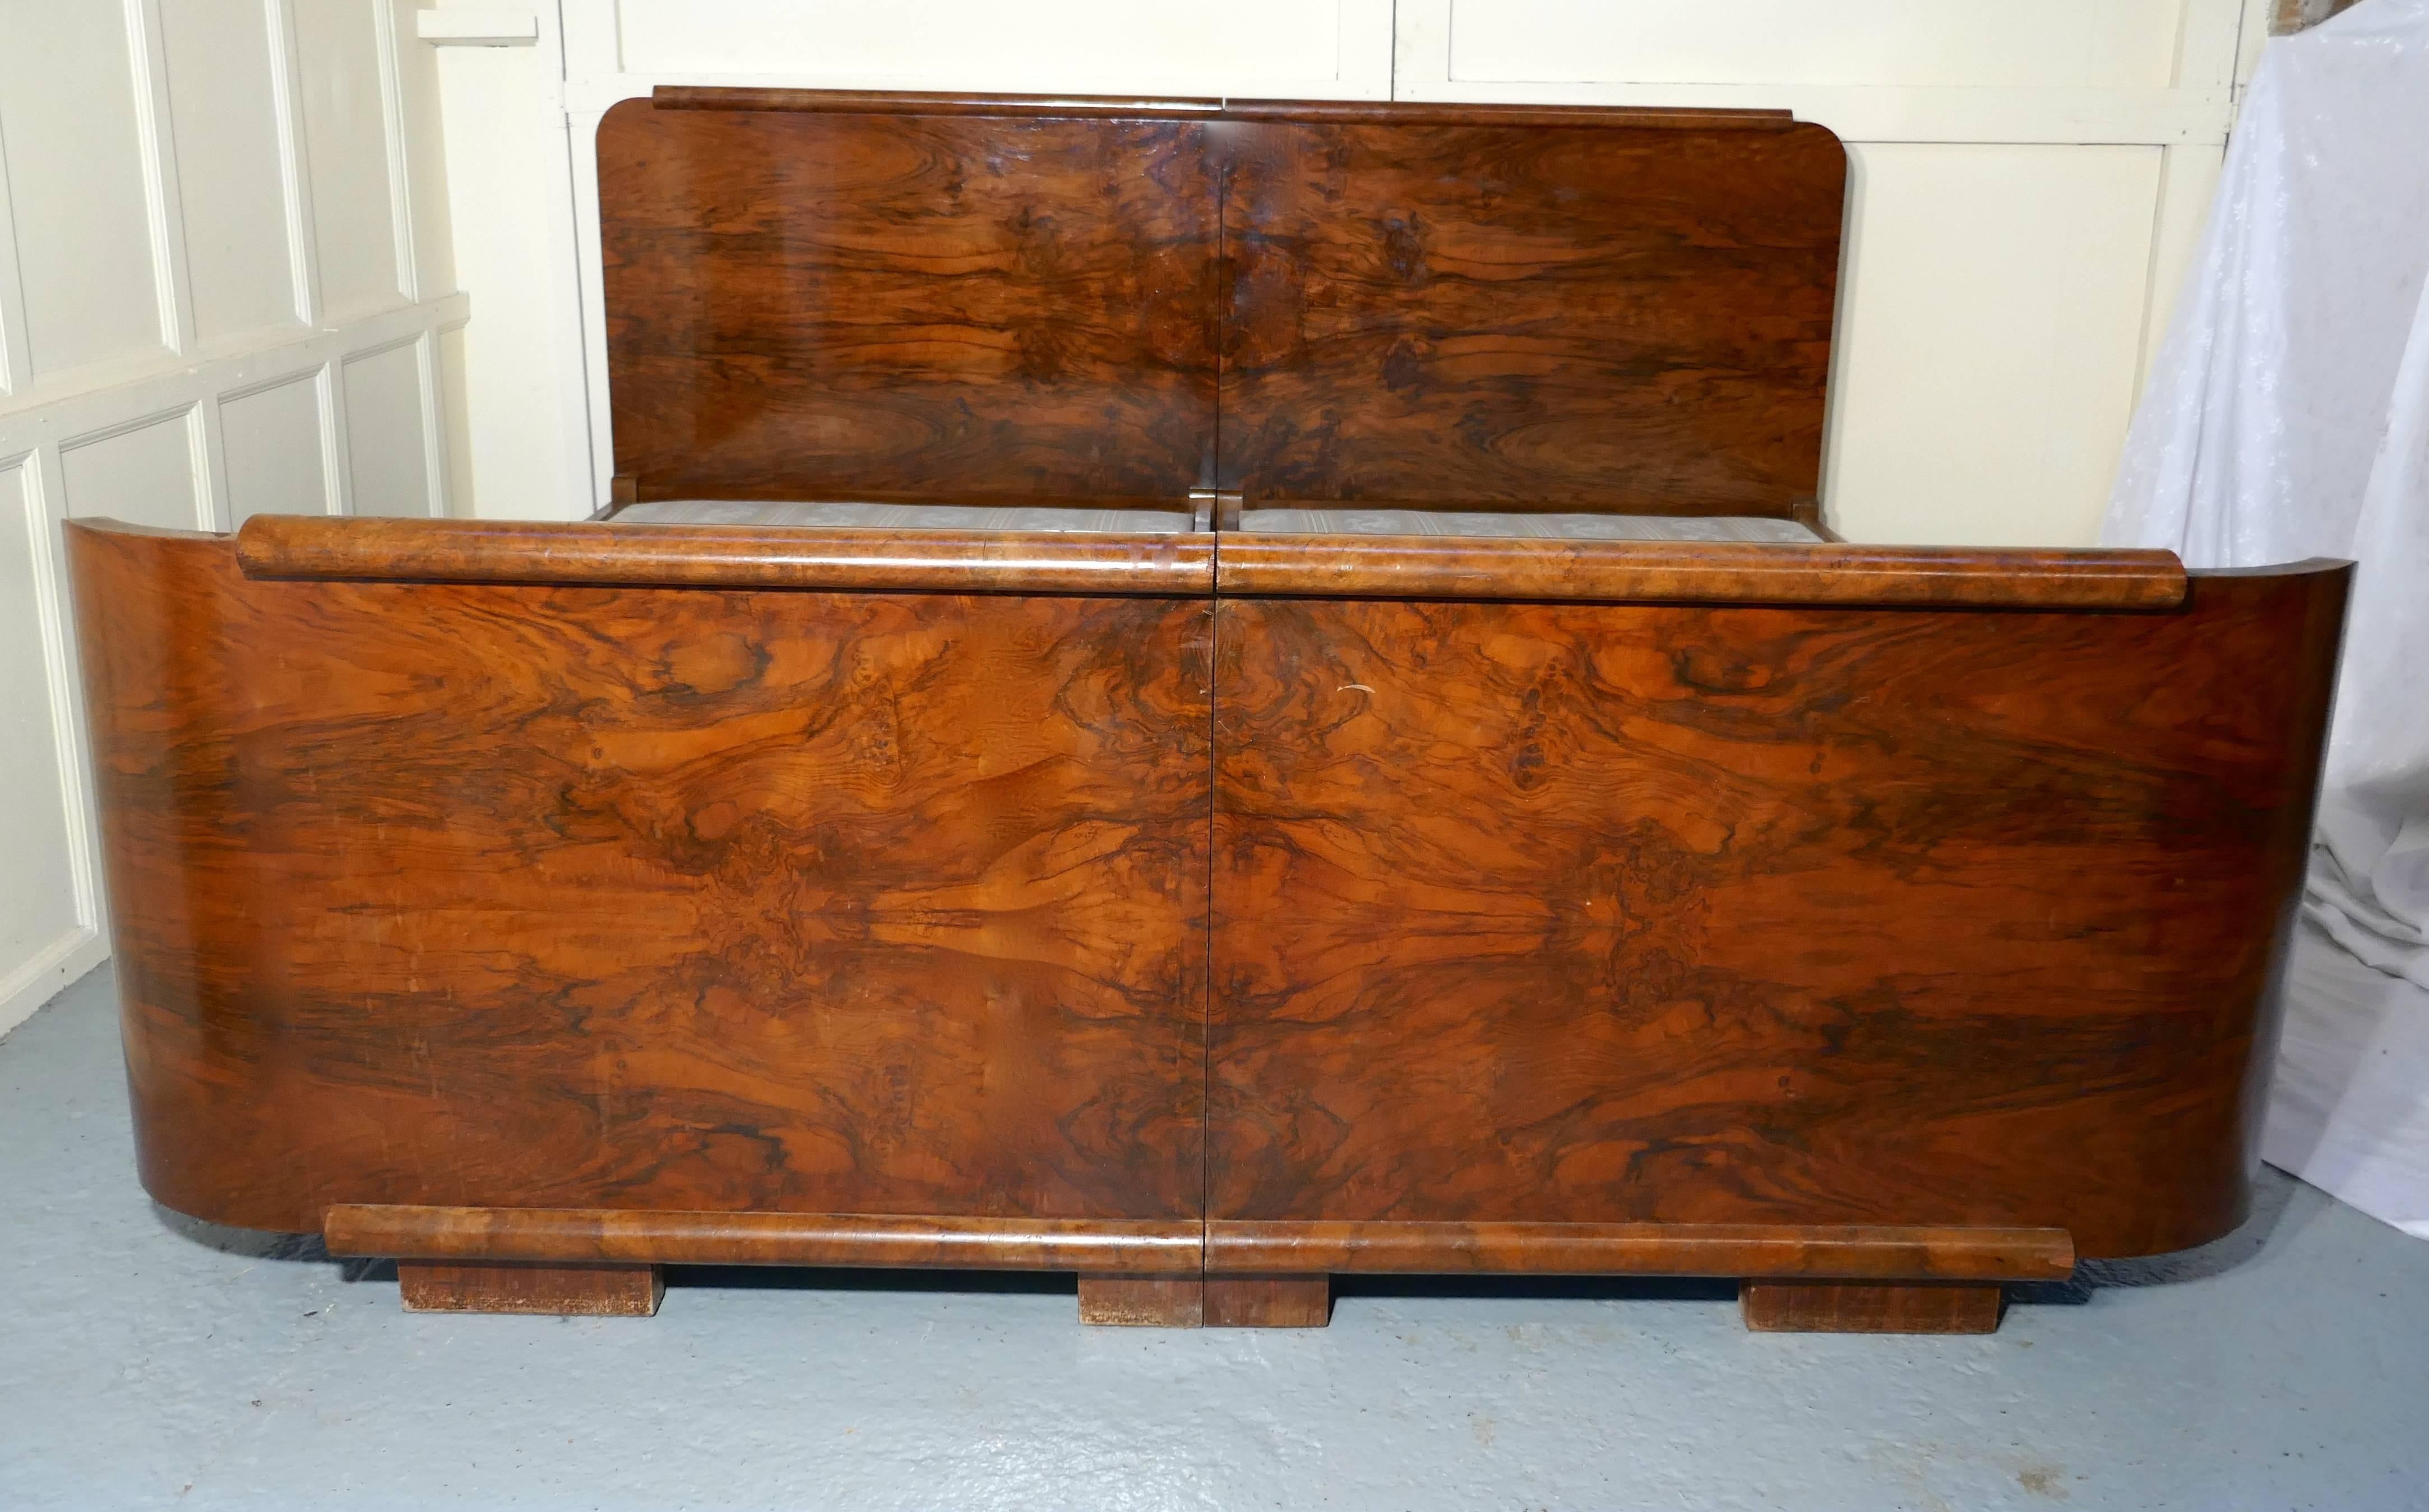 A 7-ft burr walnut Art Deco French king-size double bed or twin beds

A stunning piece of French Art Deco design, the curved foot board is veneered in burr walnut, each half mirroring the other and the high head board is mirrored in the same way,